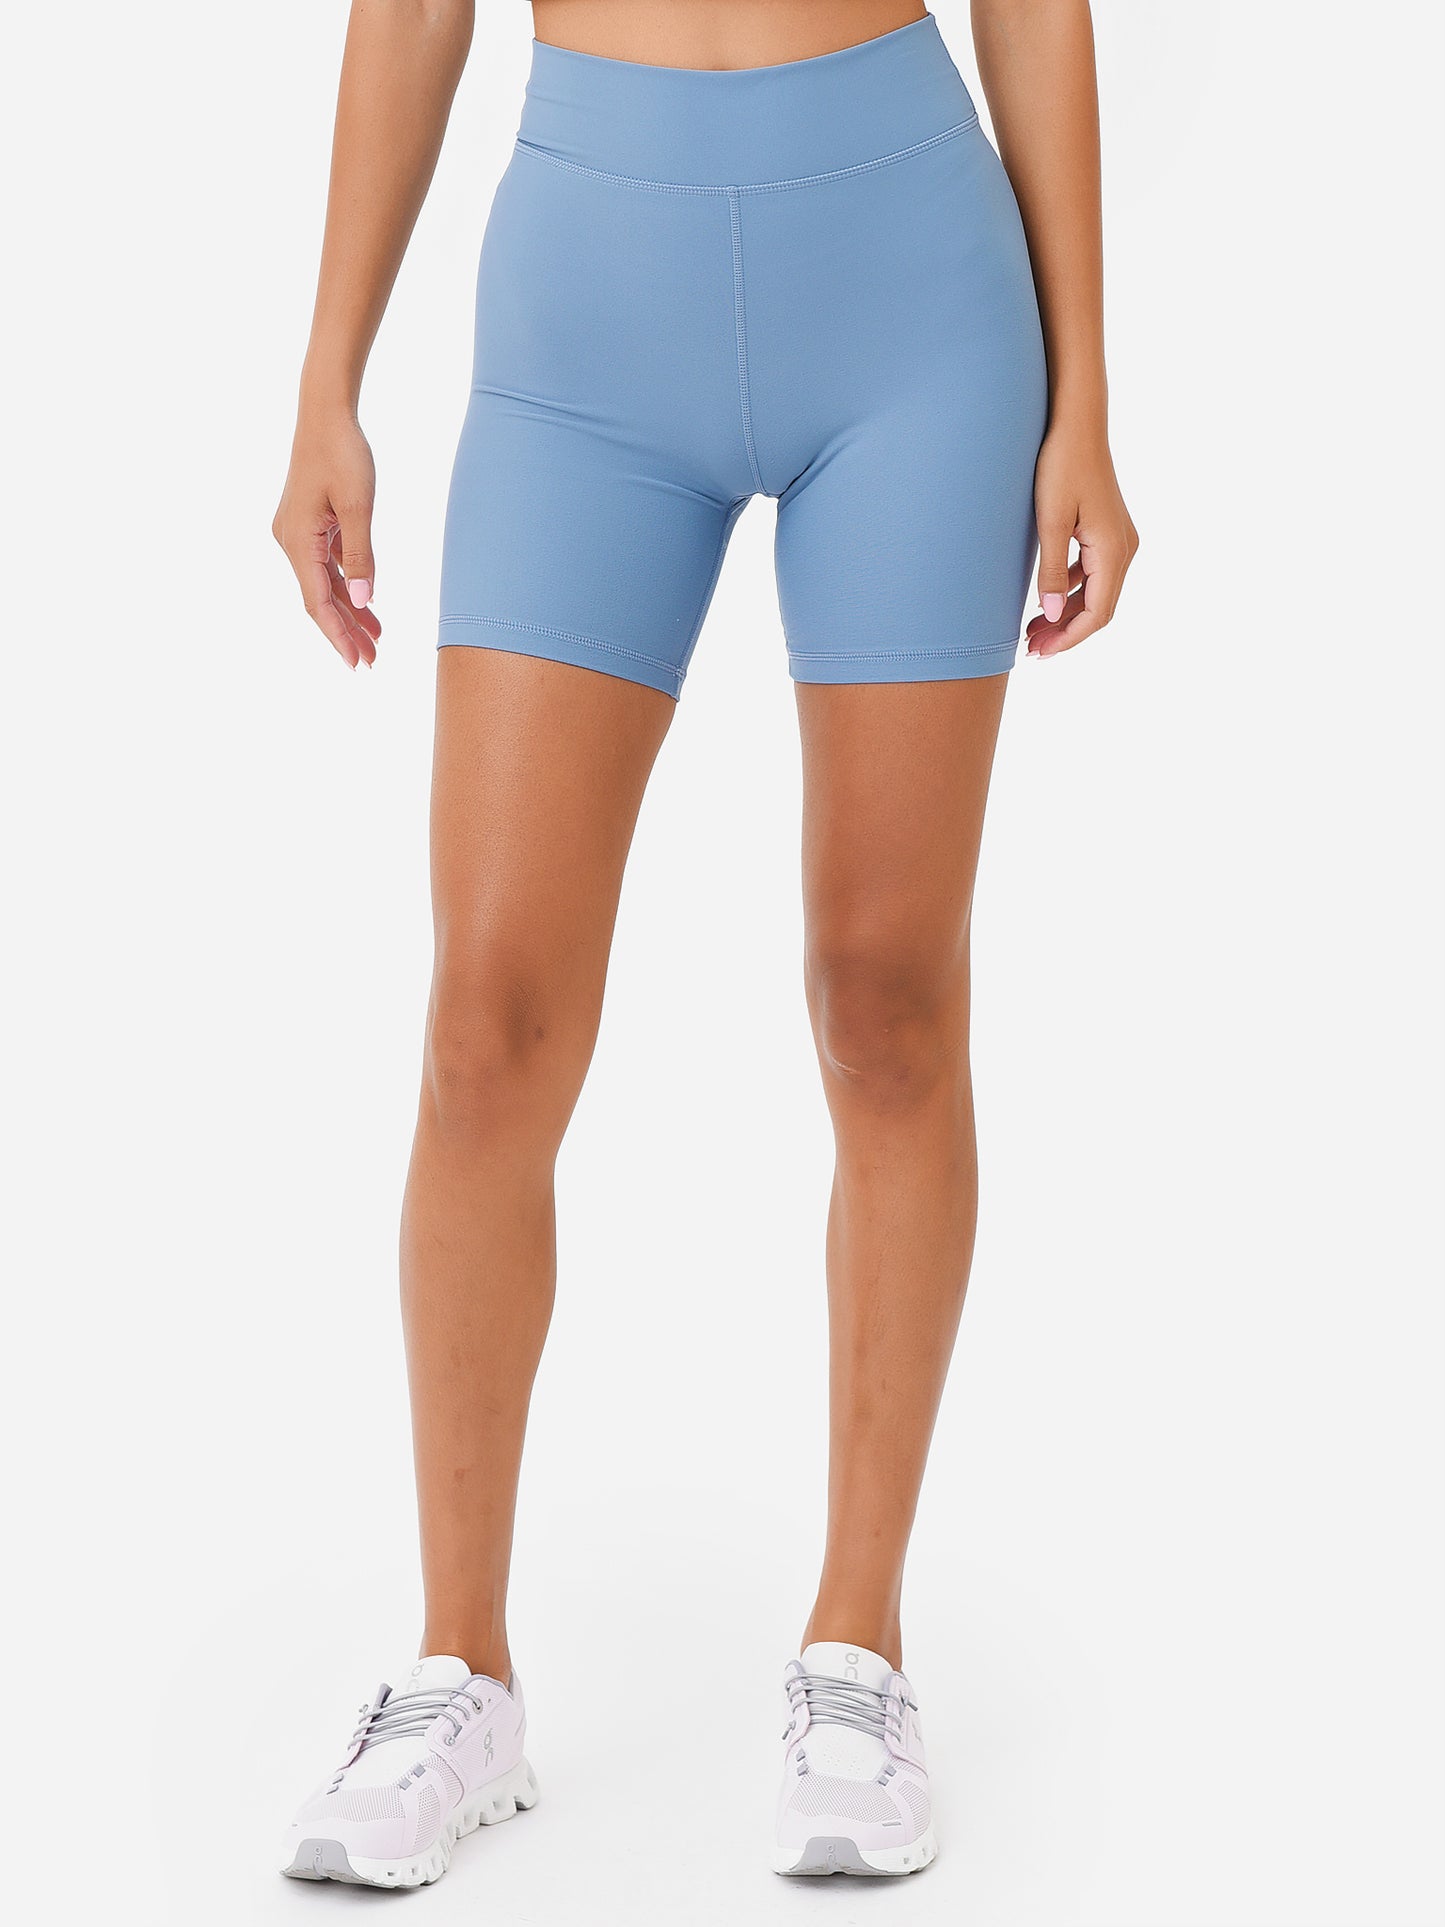 The Upside Women's Peached Spin Short